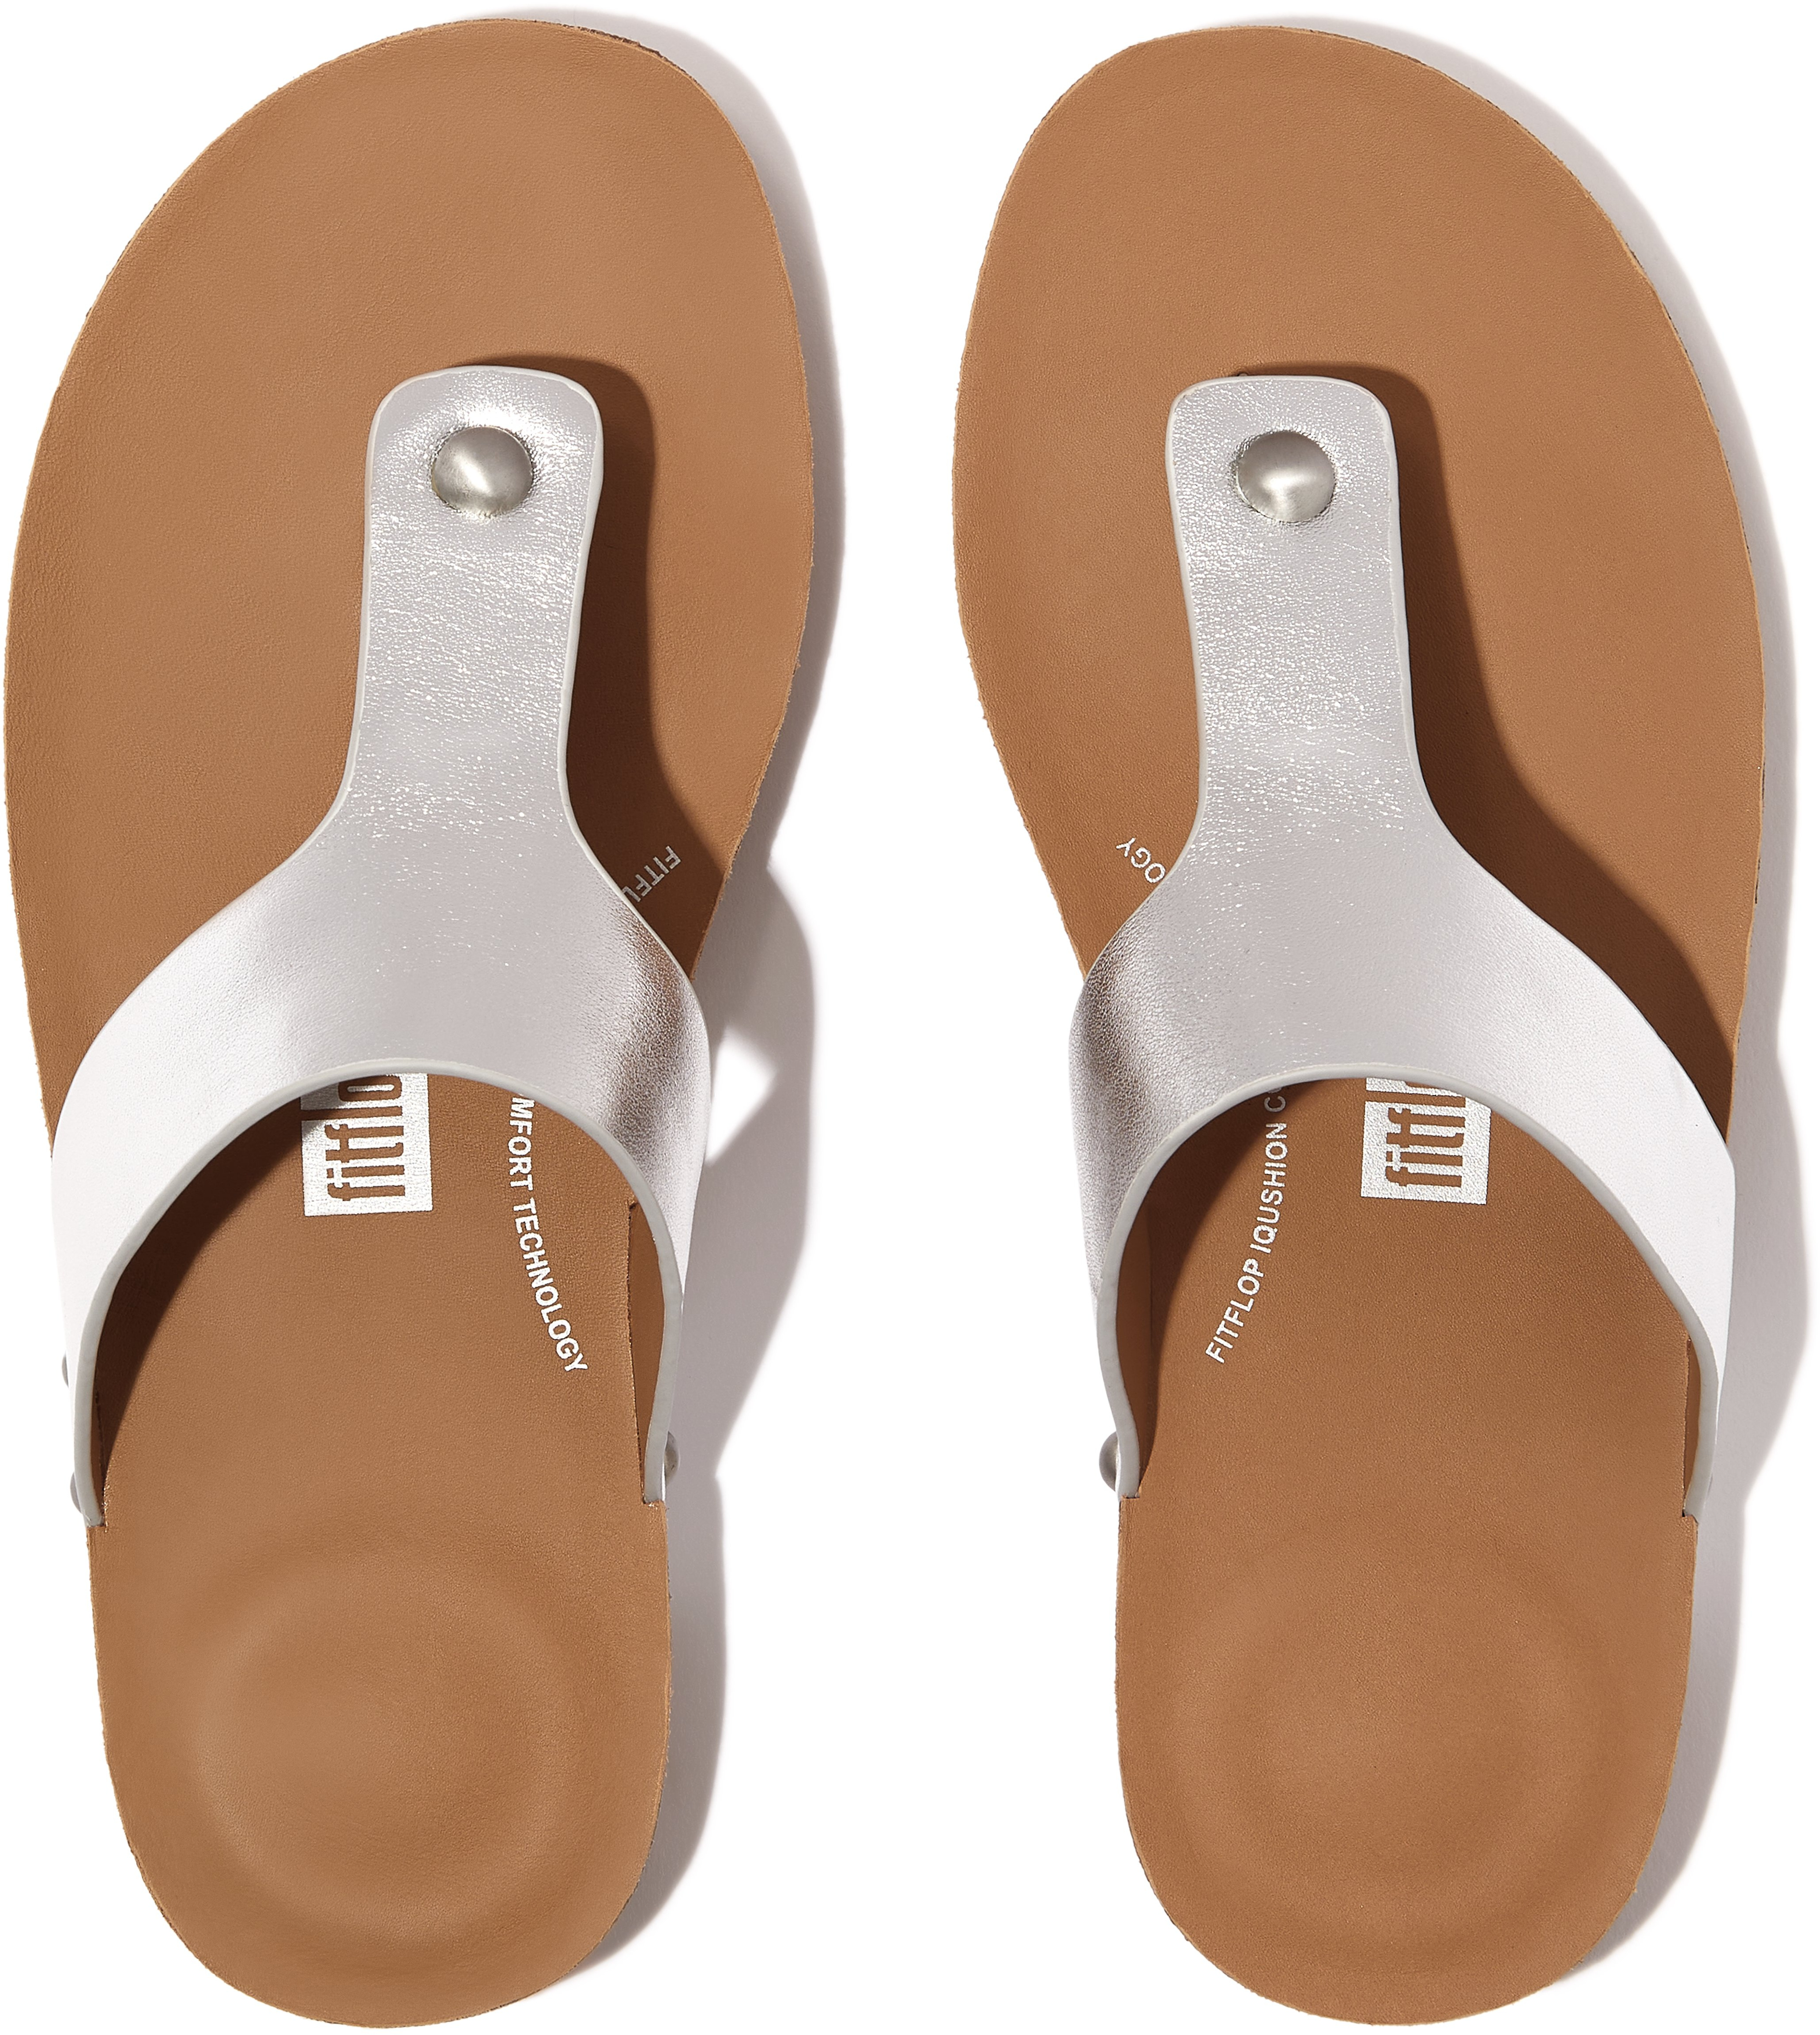 Iqushion Metallic-Leather Toe-Post Sandals FitFlop